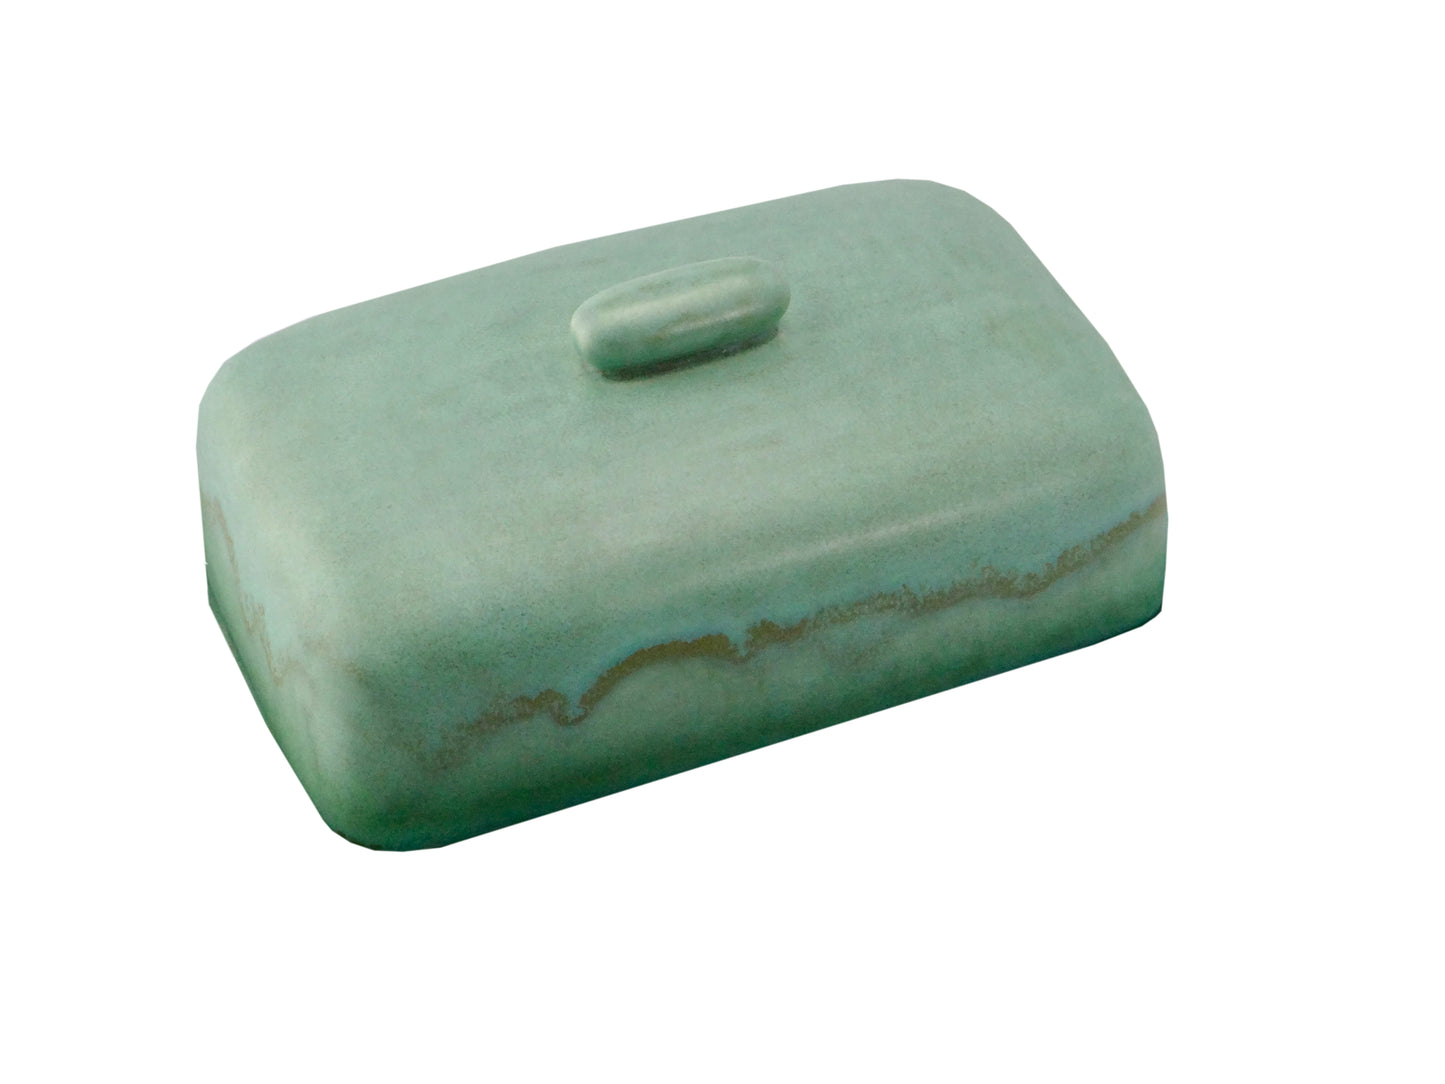 butter dish lid only